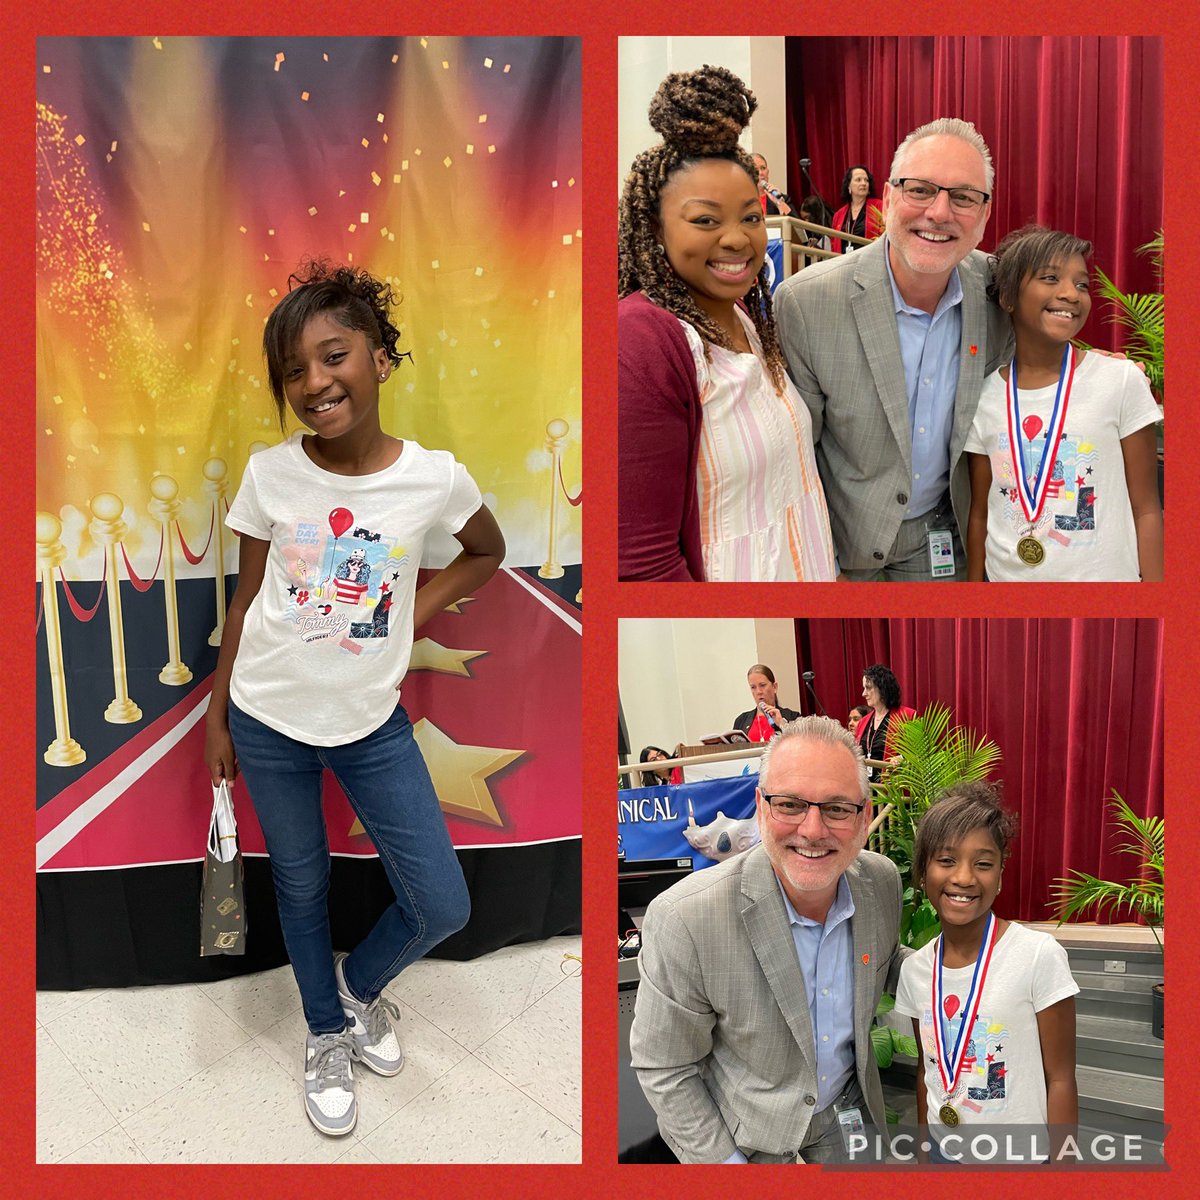 We are proud of our 3rd grader Amora. She was a recipient this morning of the Just Do it Award. She consistently shows kindness, love, and support to her classmates. Amora shines bright every single day! Way to go Amora! @rumble_marie @RPE_AP @BcpsCentral_ @browardschools